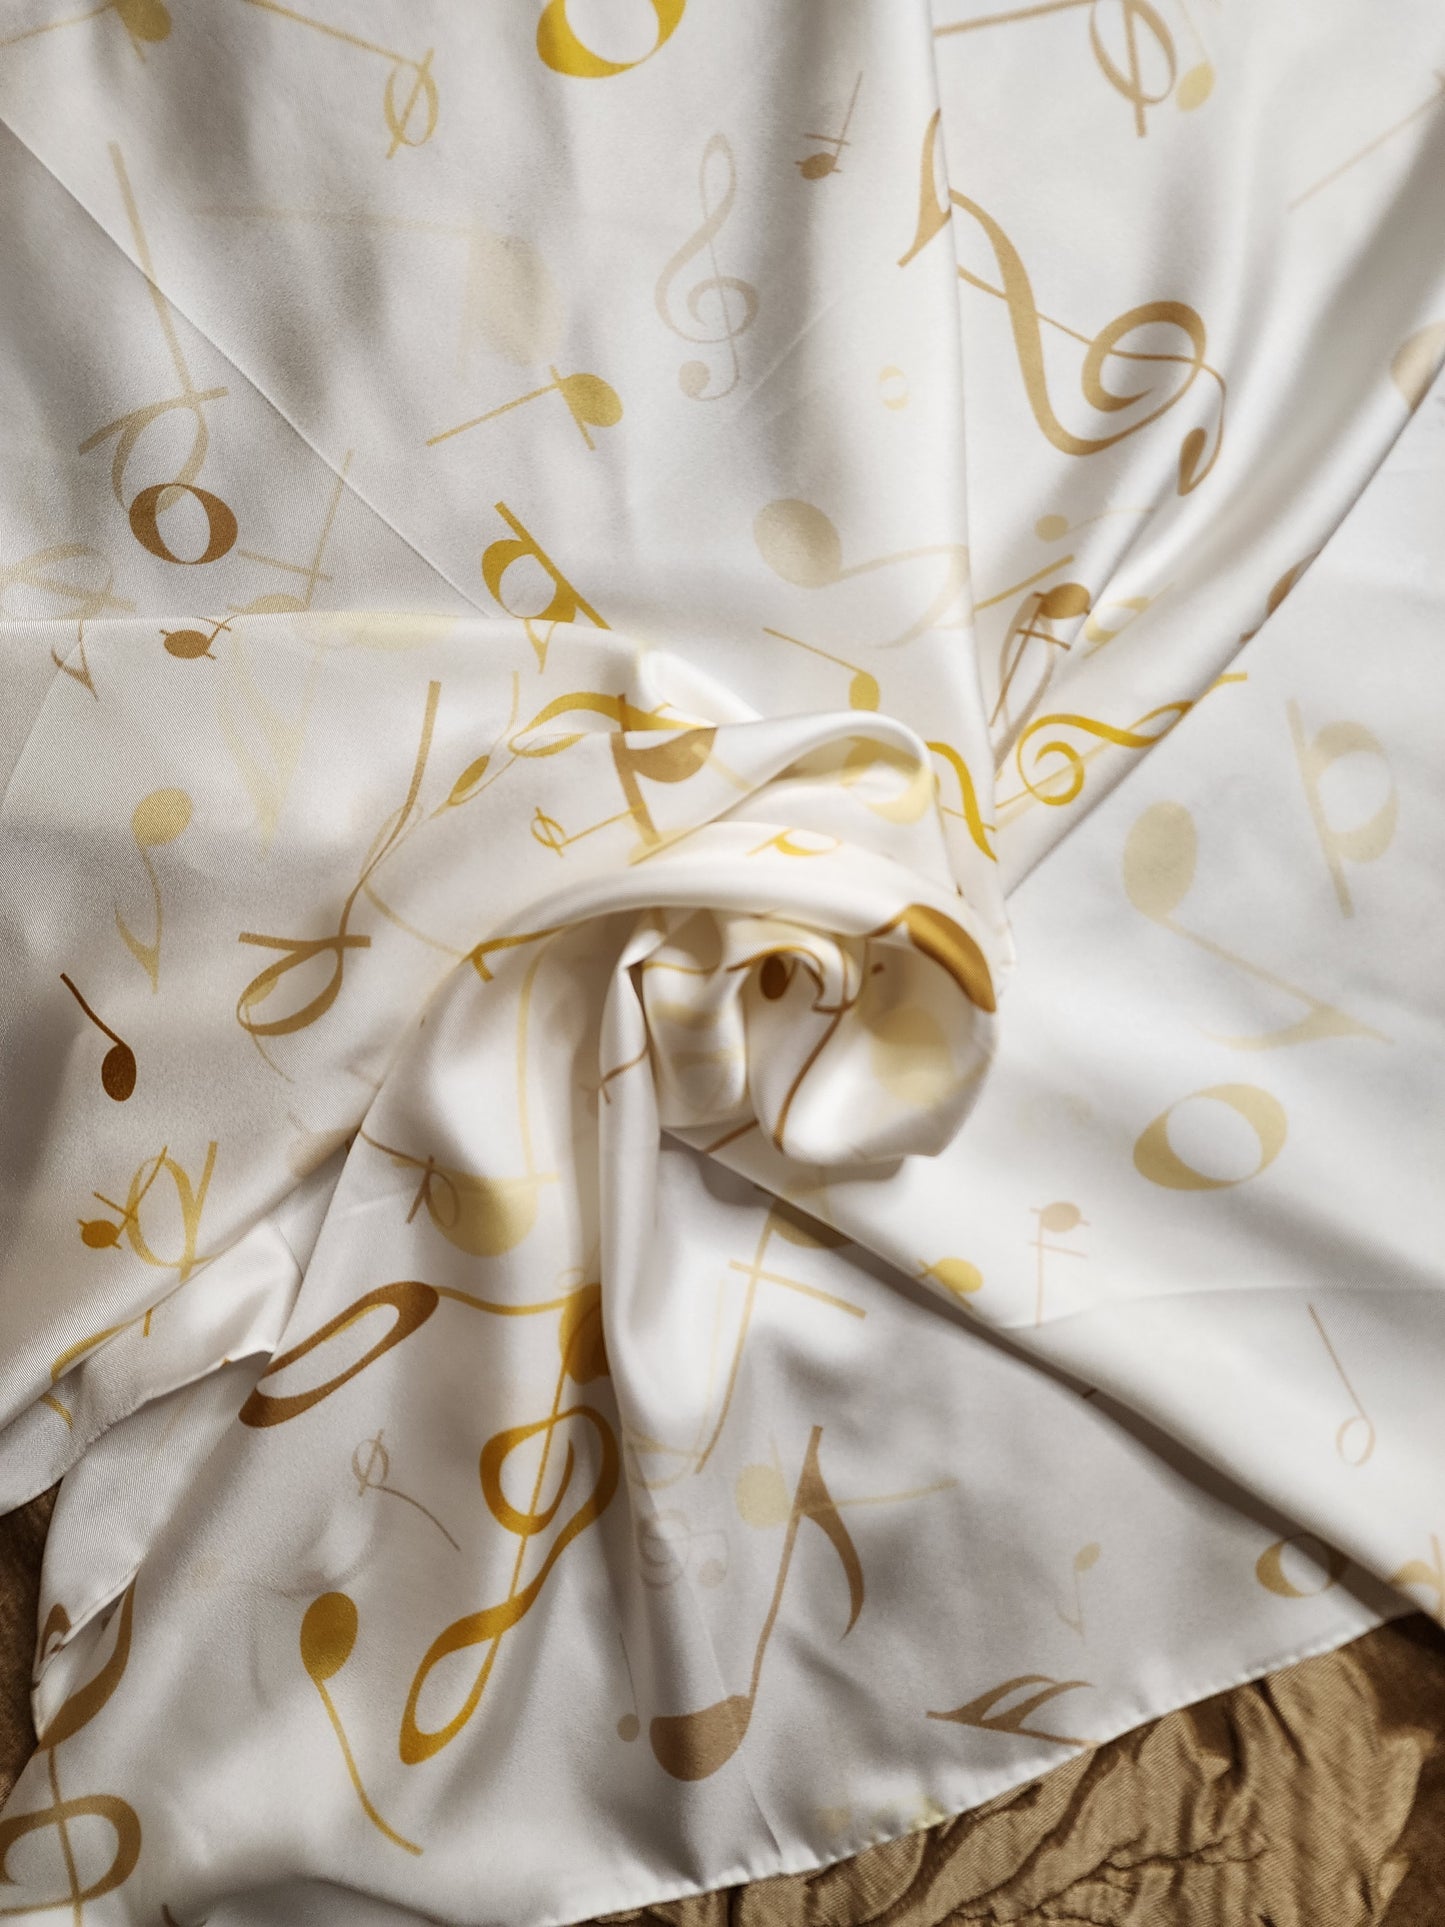 White silk scarf with scattered gold music notes